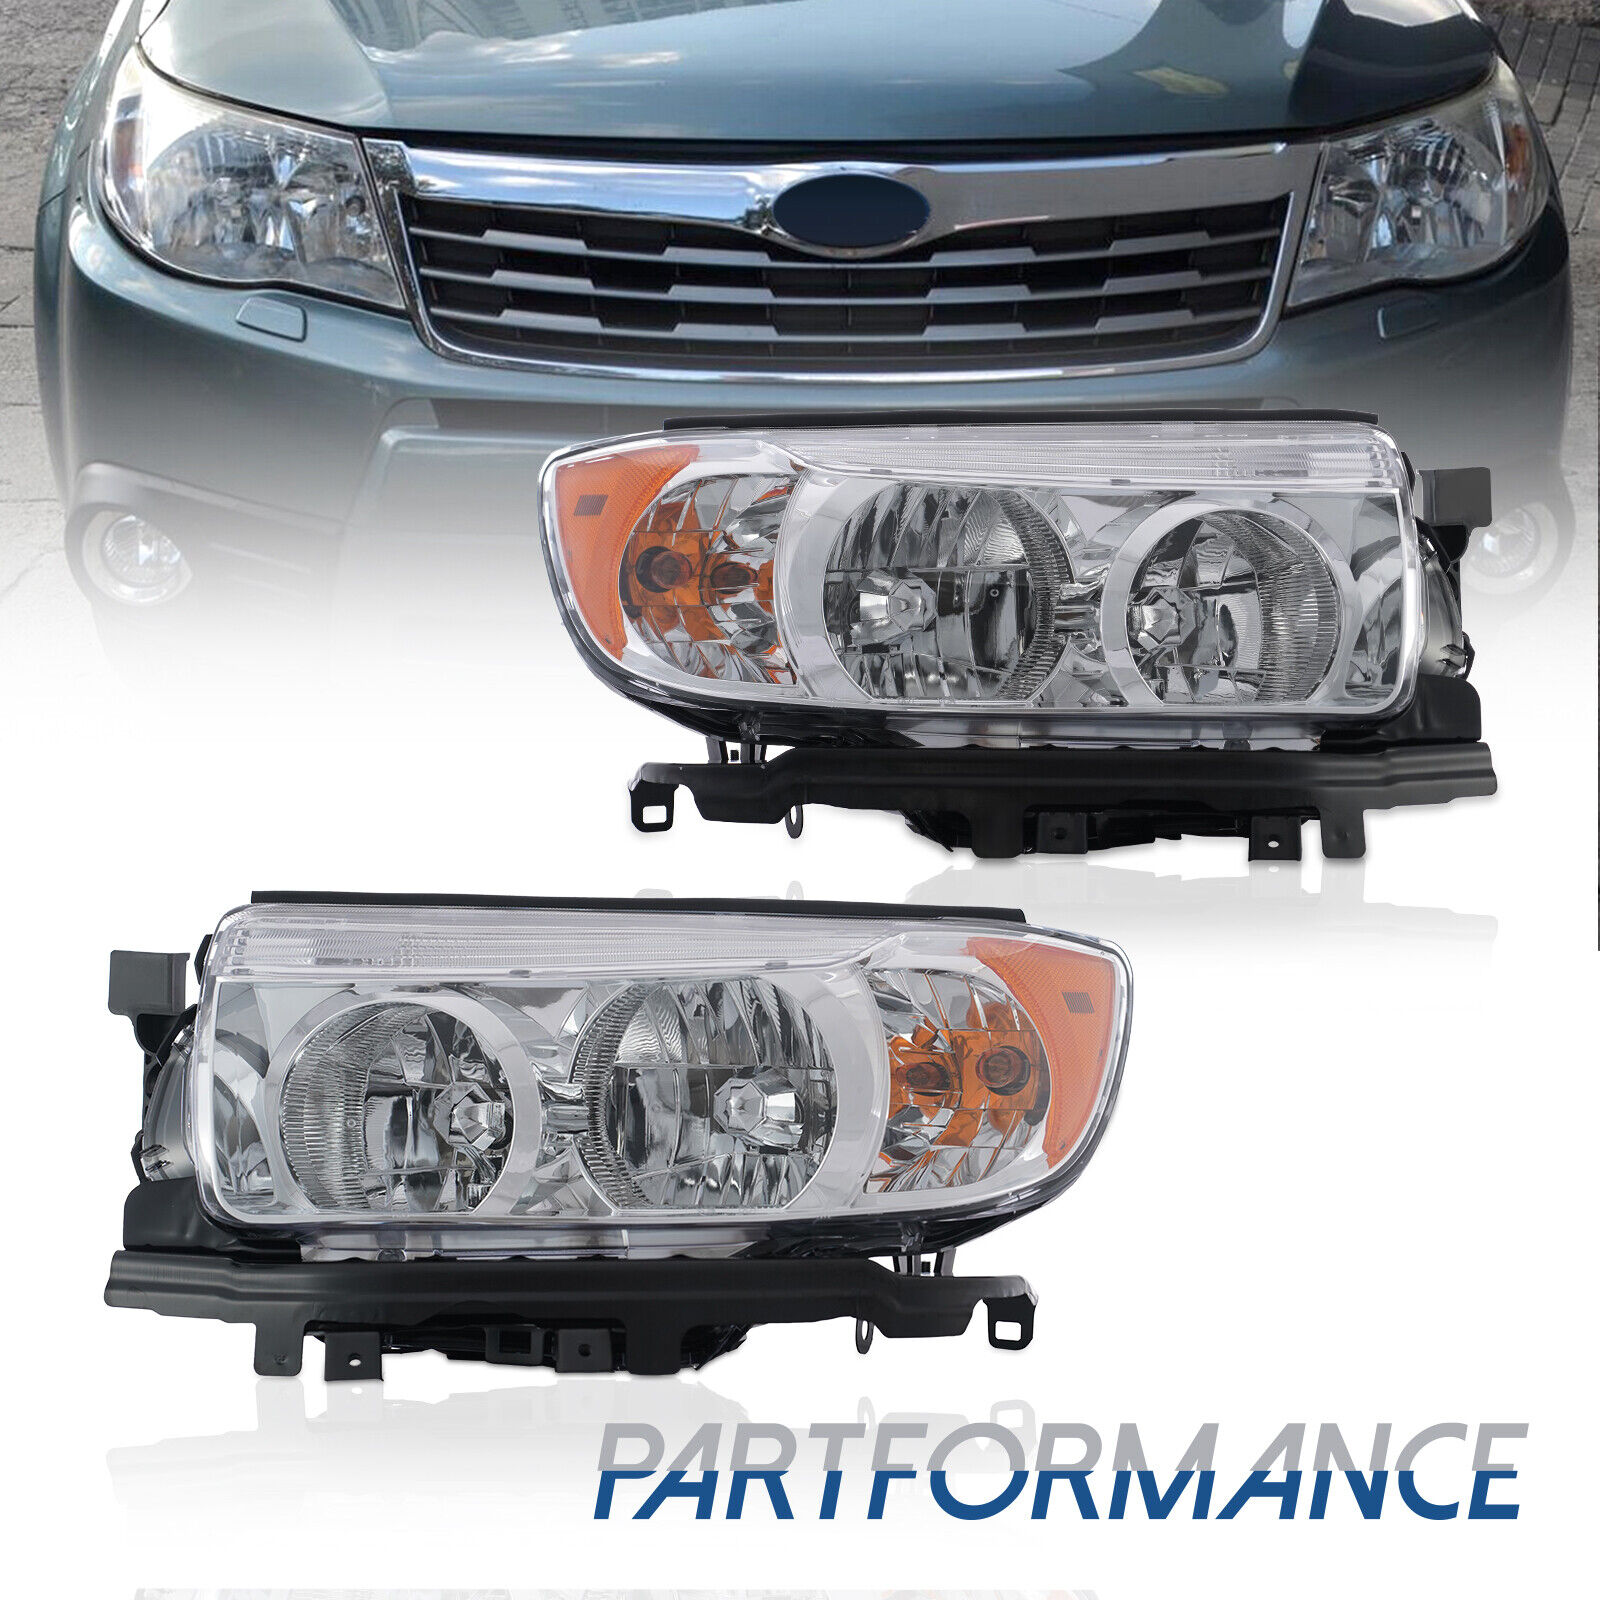 PairFor 2006-2008 Subaru Forester Headlights Headlamps Driver & Passenger Side 